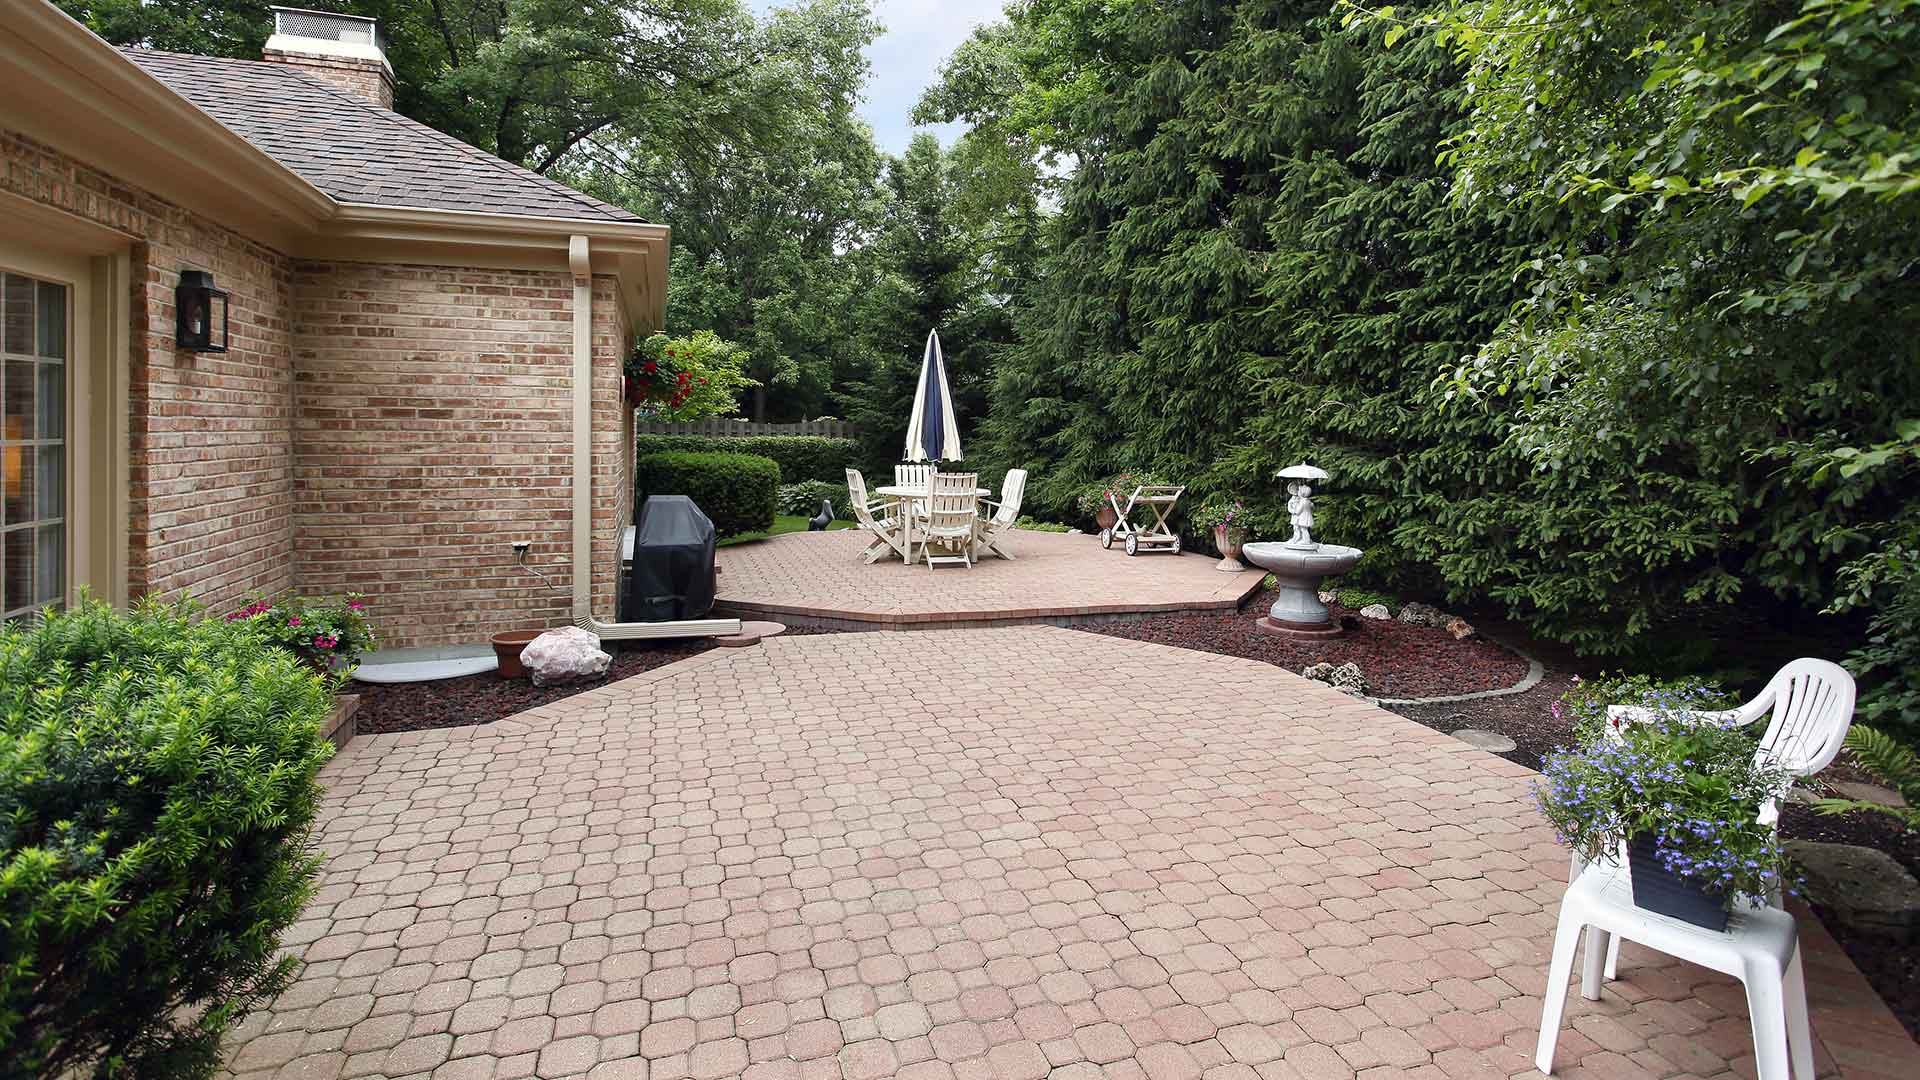 Paver patio construction at a home in Edwardsville, Illinois.